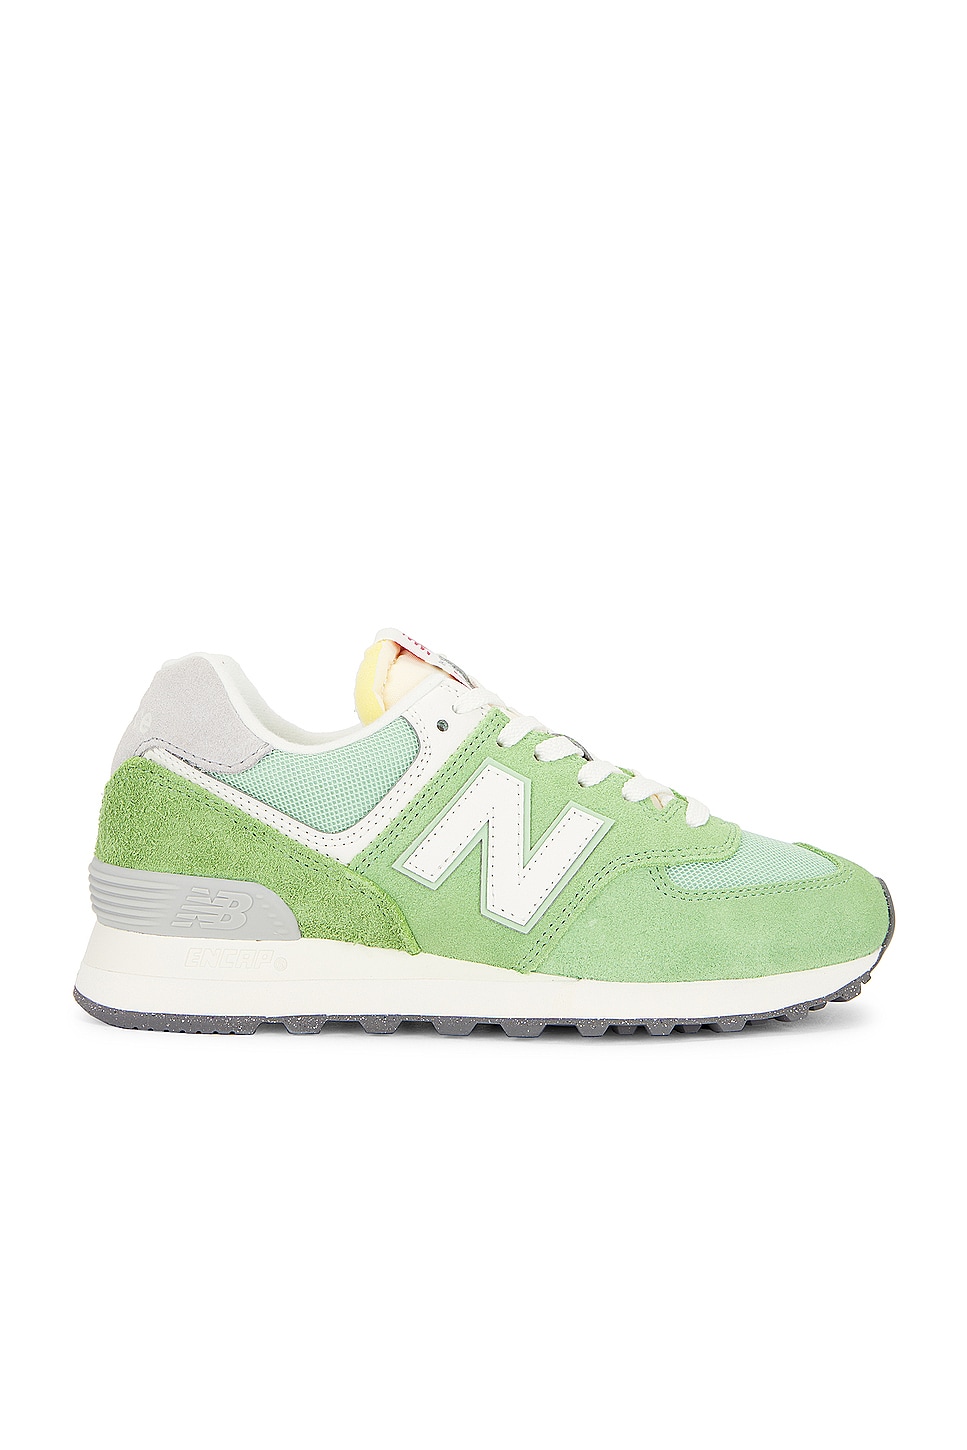 Image 1 of New Balance 574 Sneaker in Chive & Sea Salt